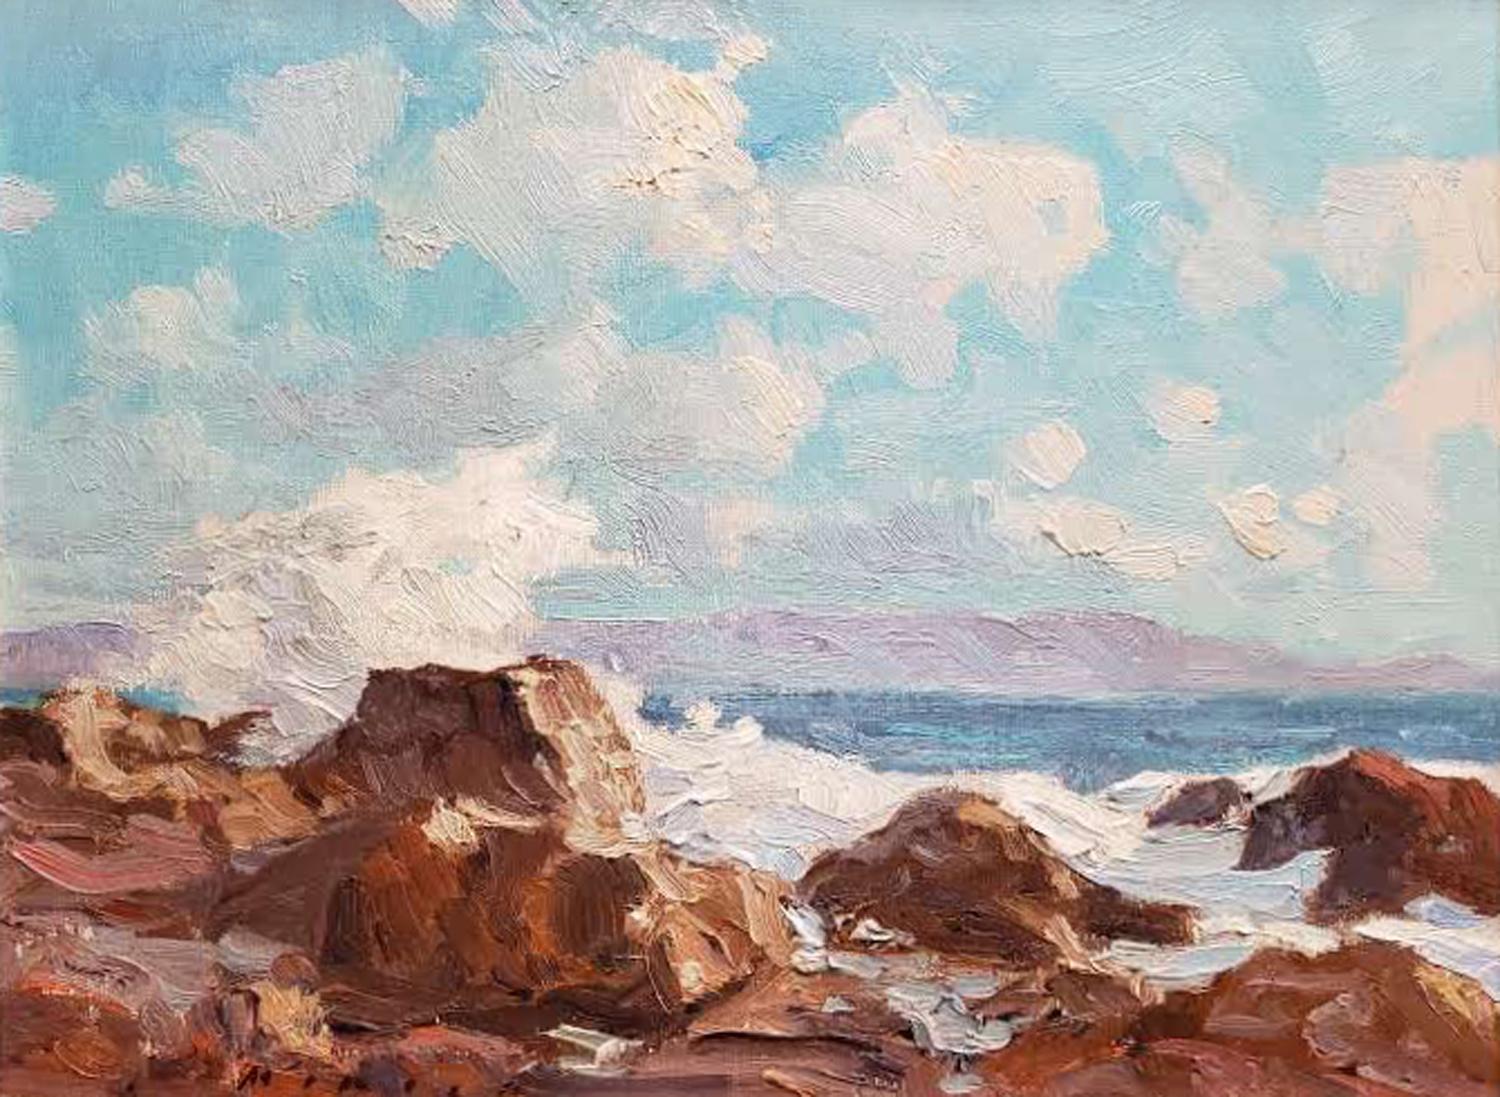 Summer Afternoon, Inspiration Point - Painting by Stephen Mirich